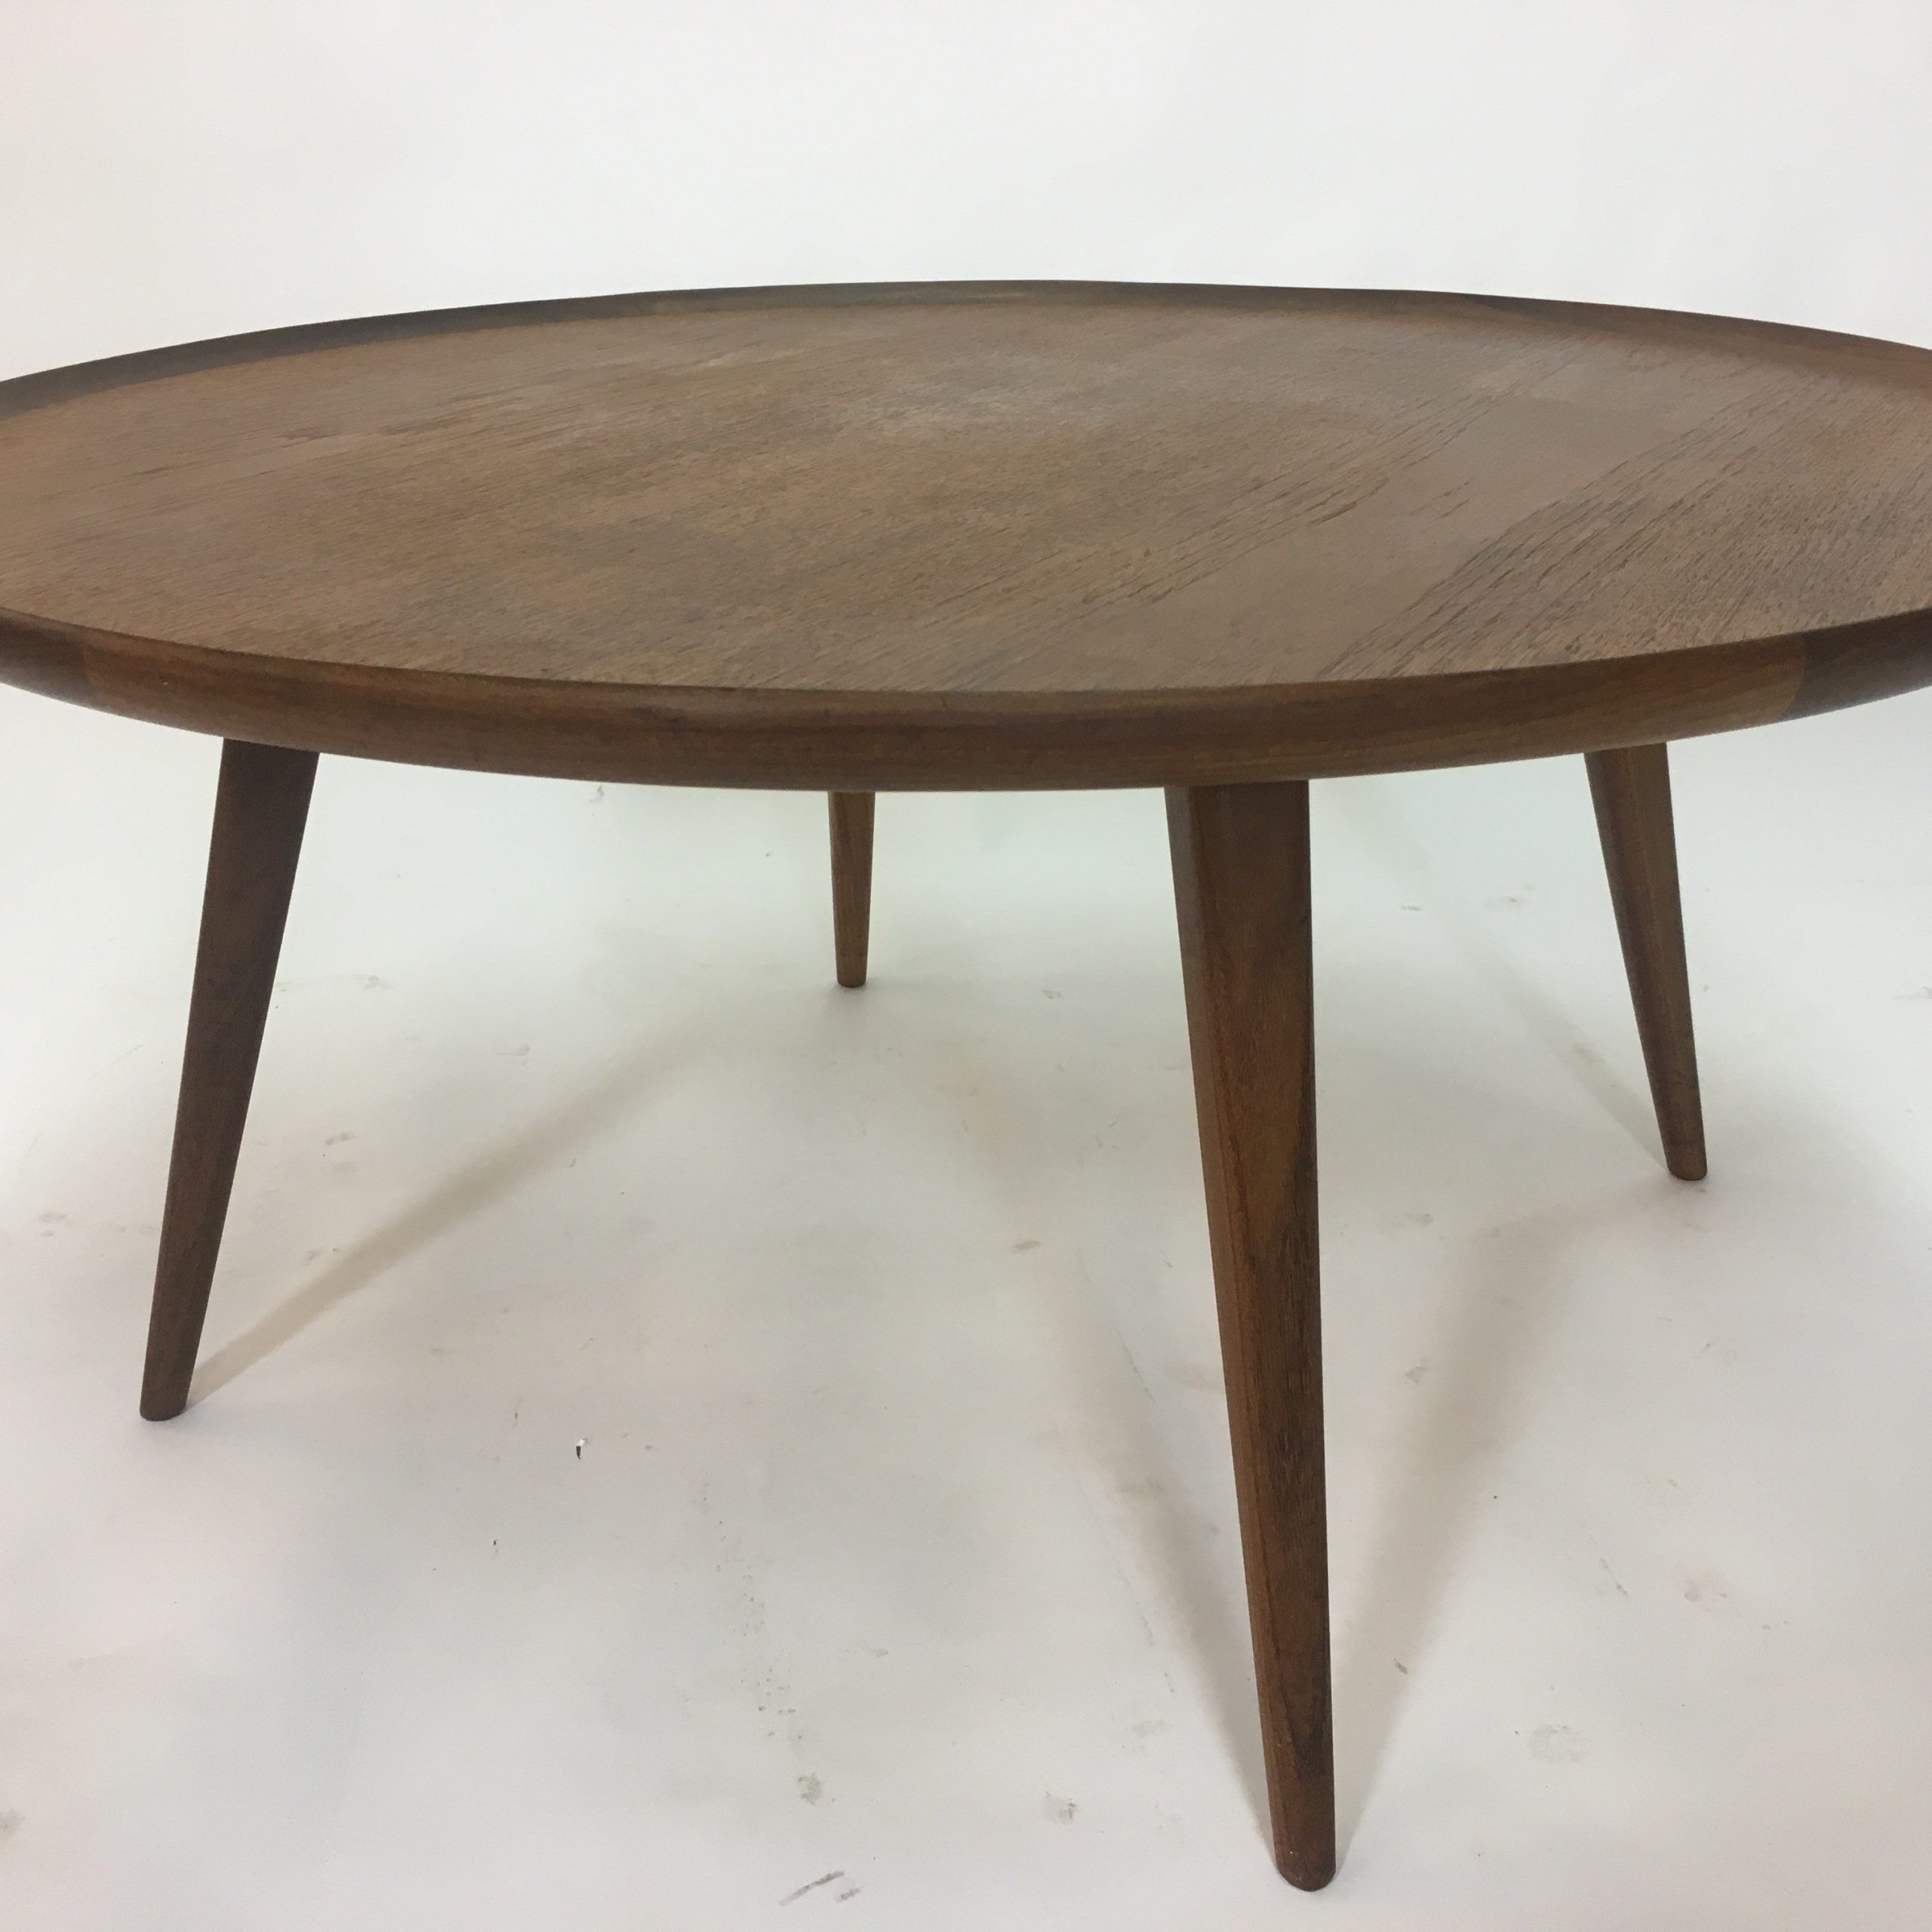 Famous Vintage Coal Coffee Tables In Vintage Round Teak Coffee Table – 1950s – Design Market (View 6 of 10)